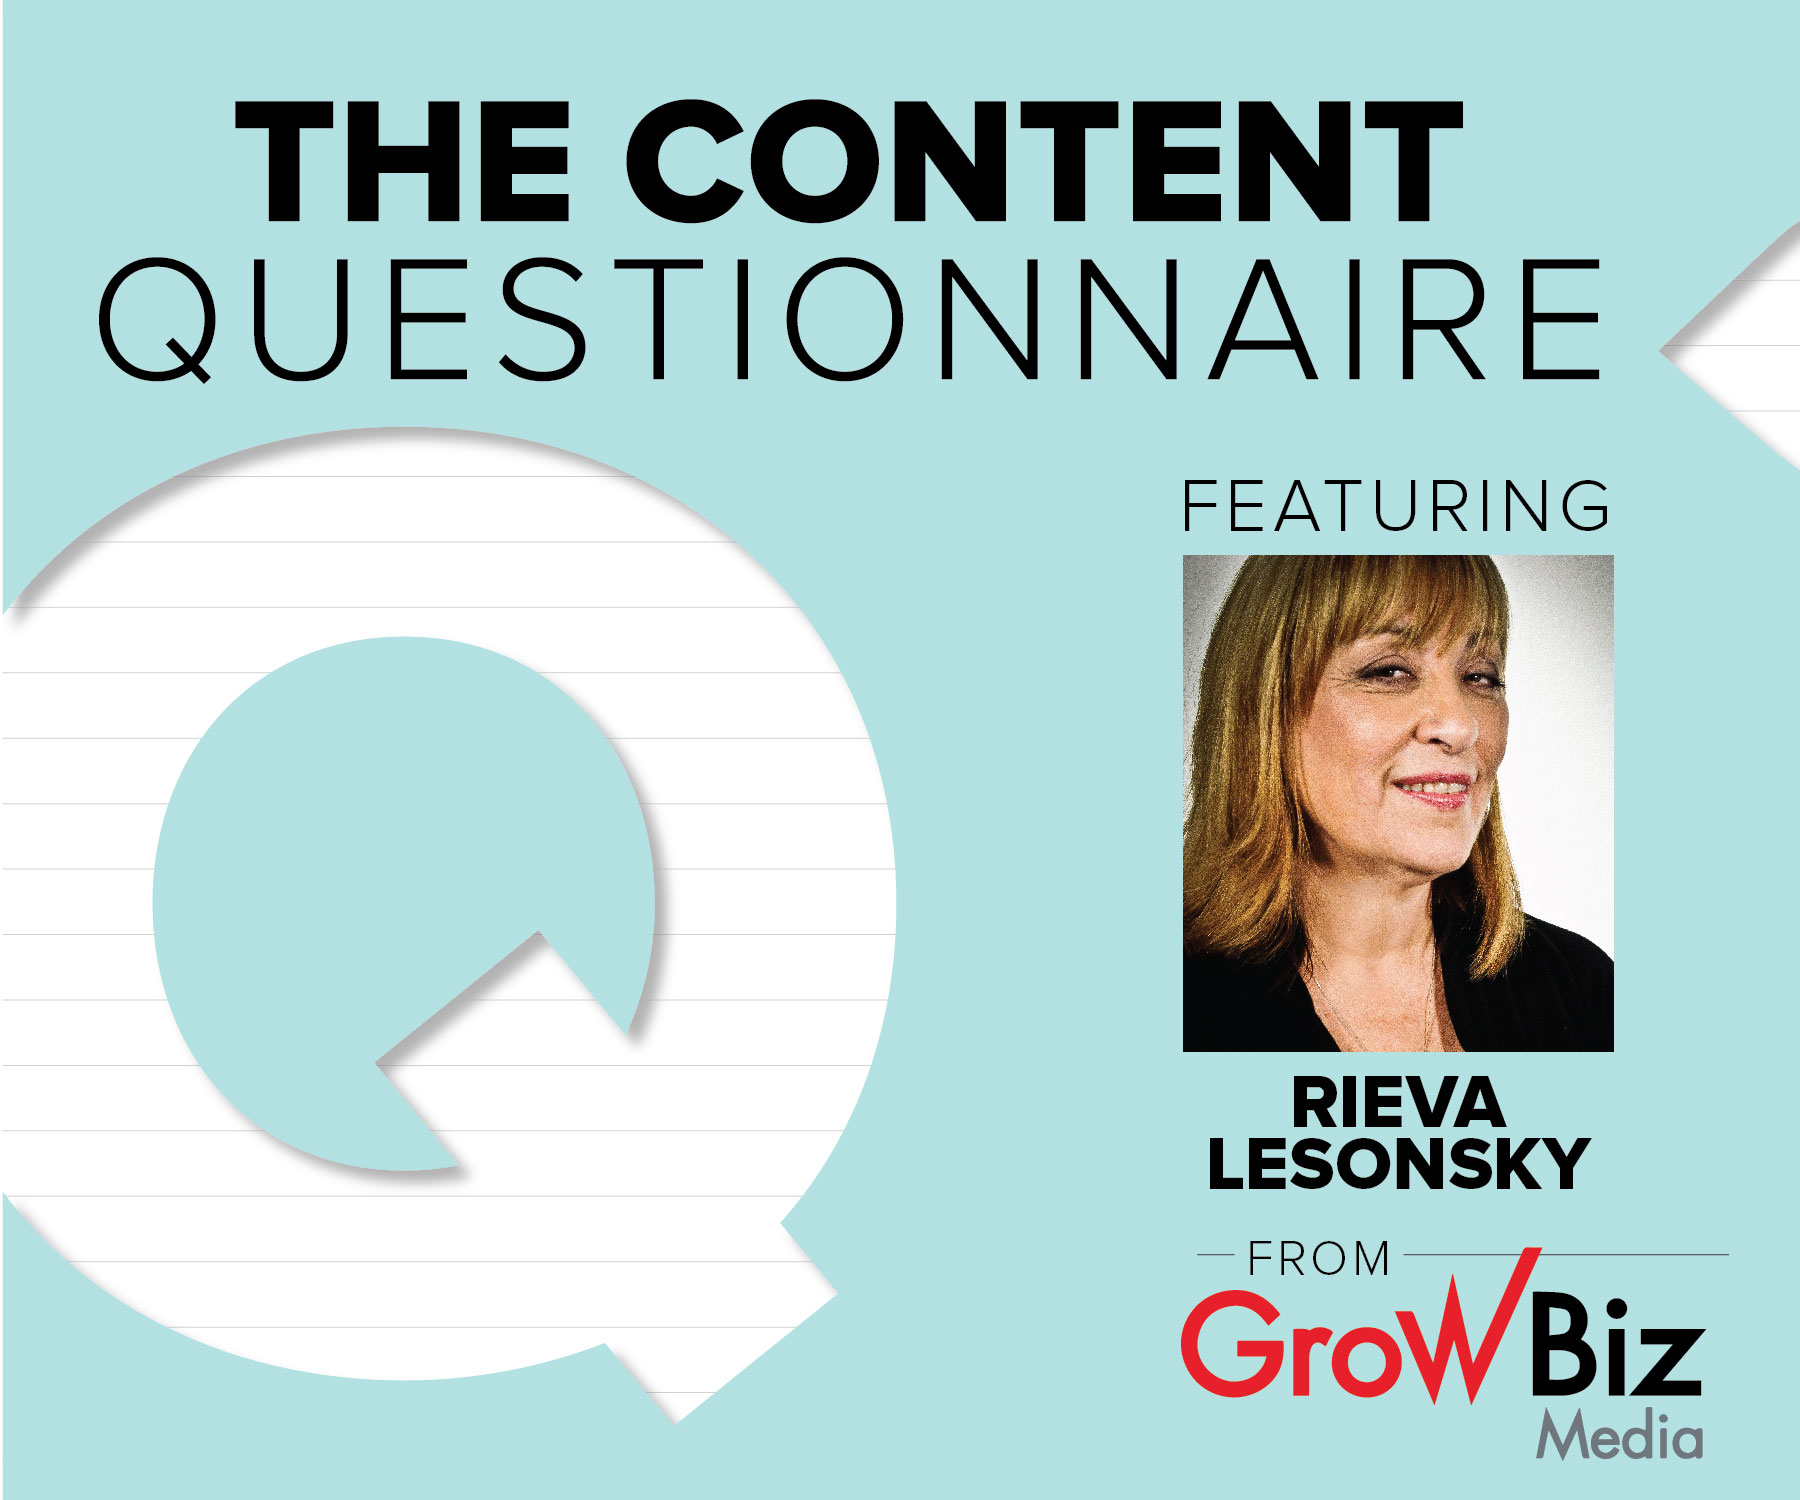 In Brafton's Content Questionnaire, Rieva Lesonsky talks about marketing strategies.